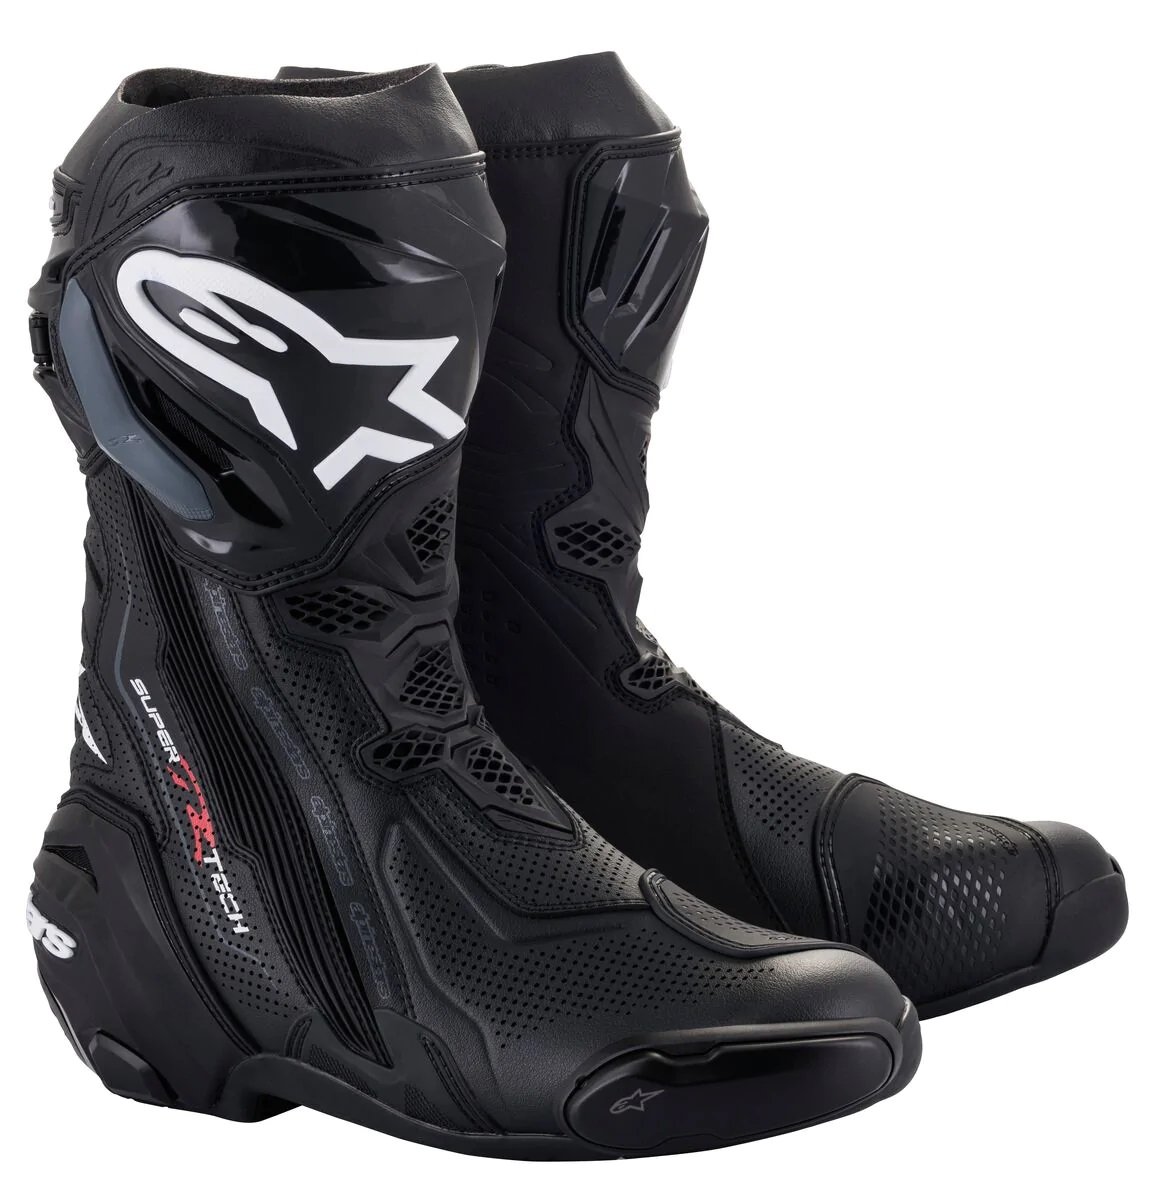 Image of Alpinestars Supertech R Vented Black Boots Size 47 ID 8059175376672